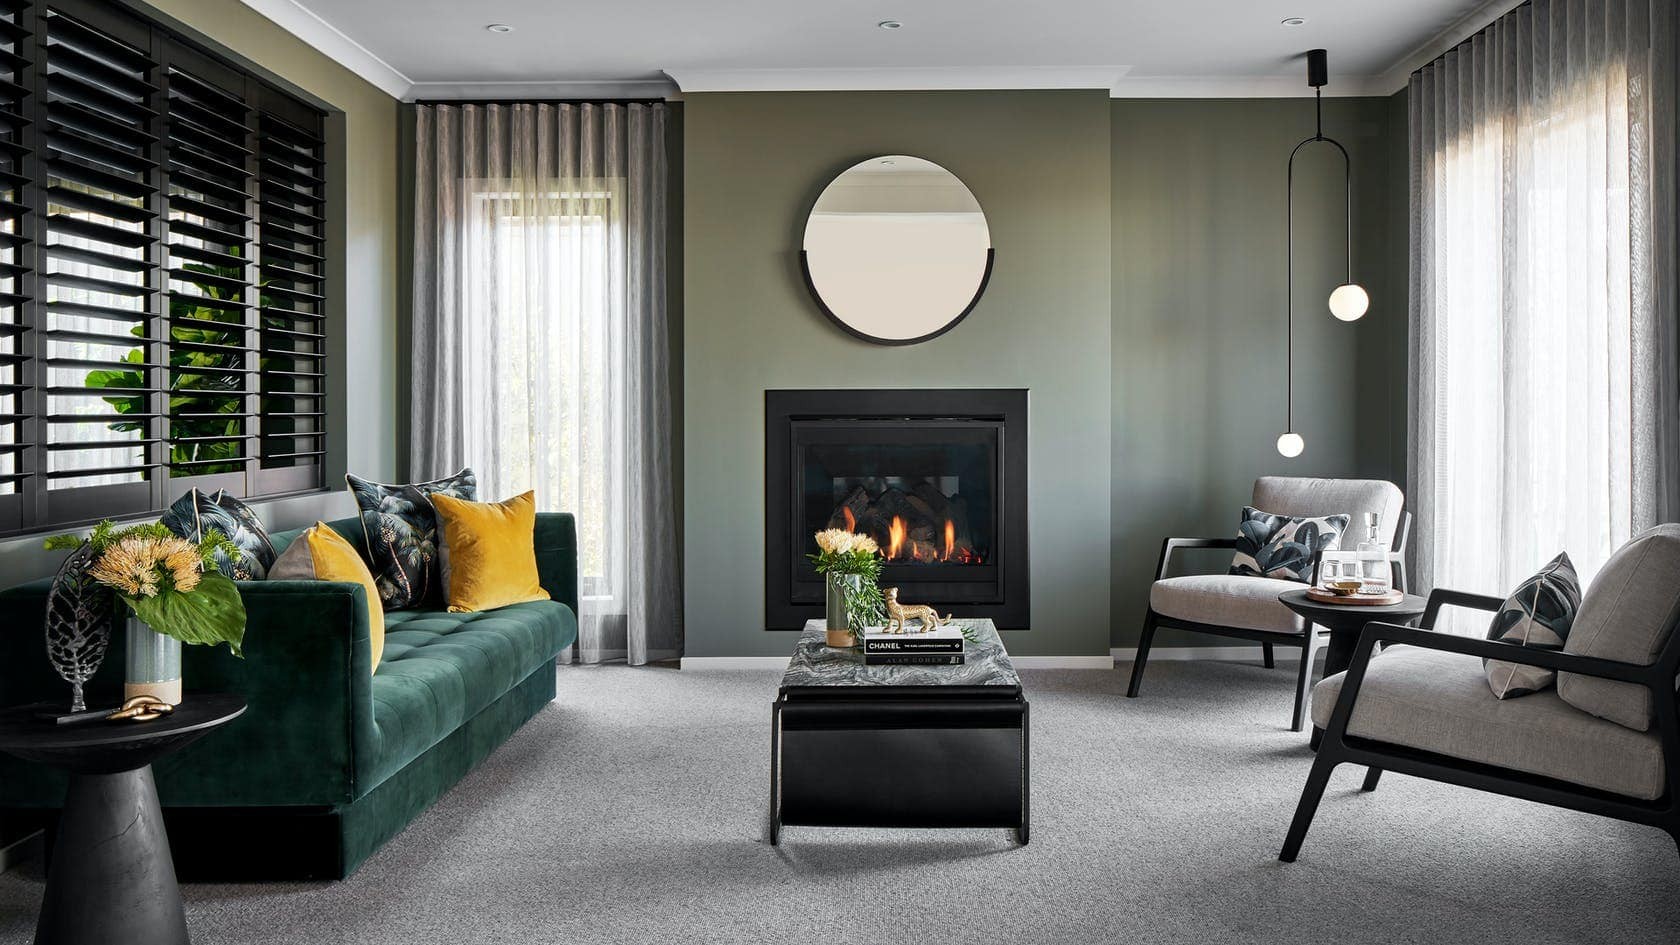 formal living room styling with dark green walls fireplace with round mirror above and velvet green sofa